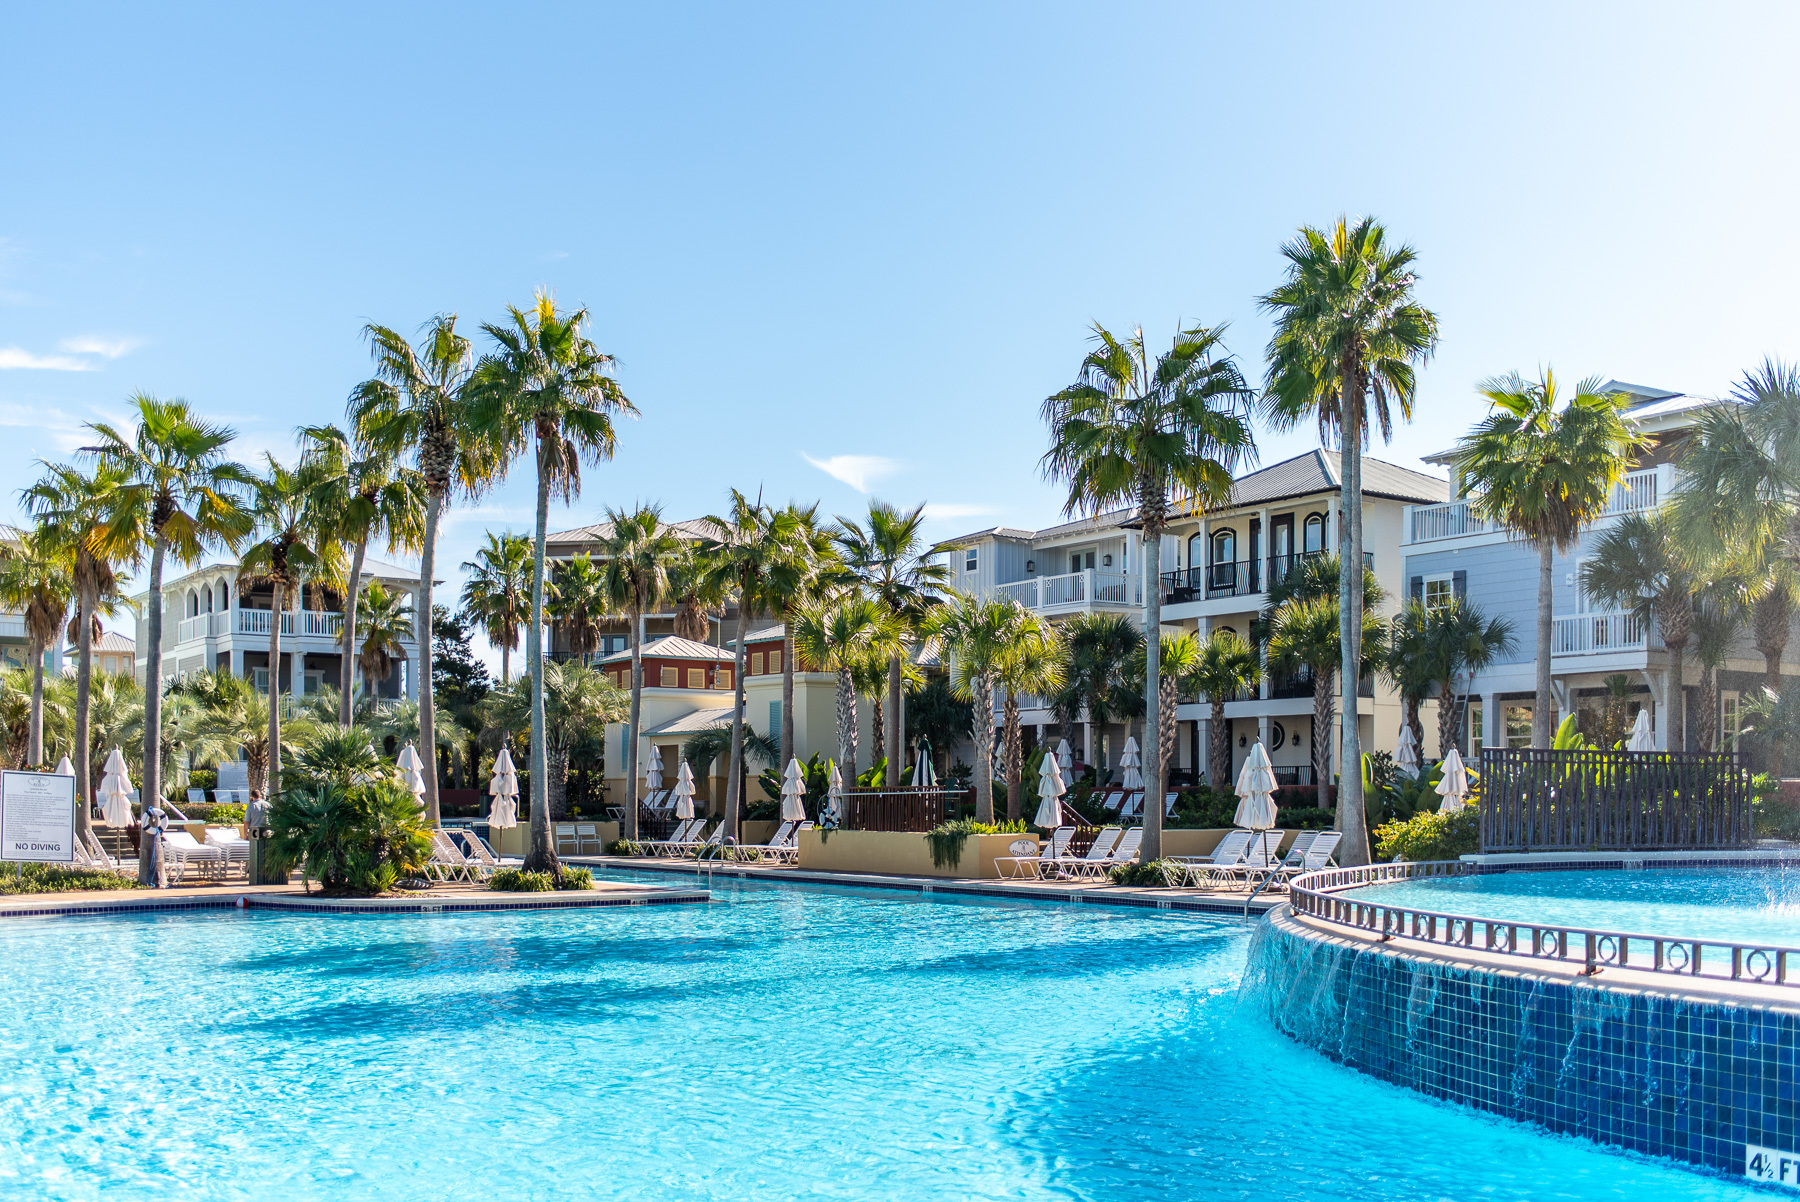 Seacrest Beach's beautiful 12,000sf pool surrounded by palm trees